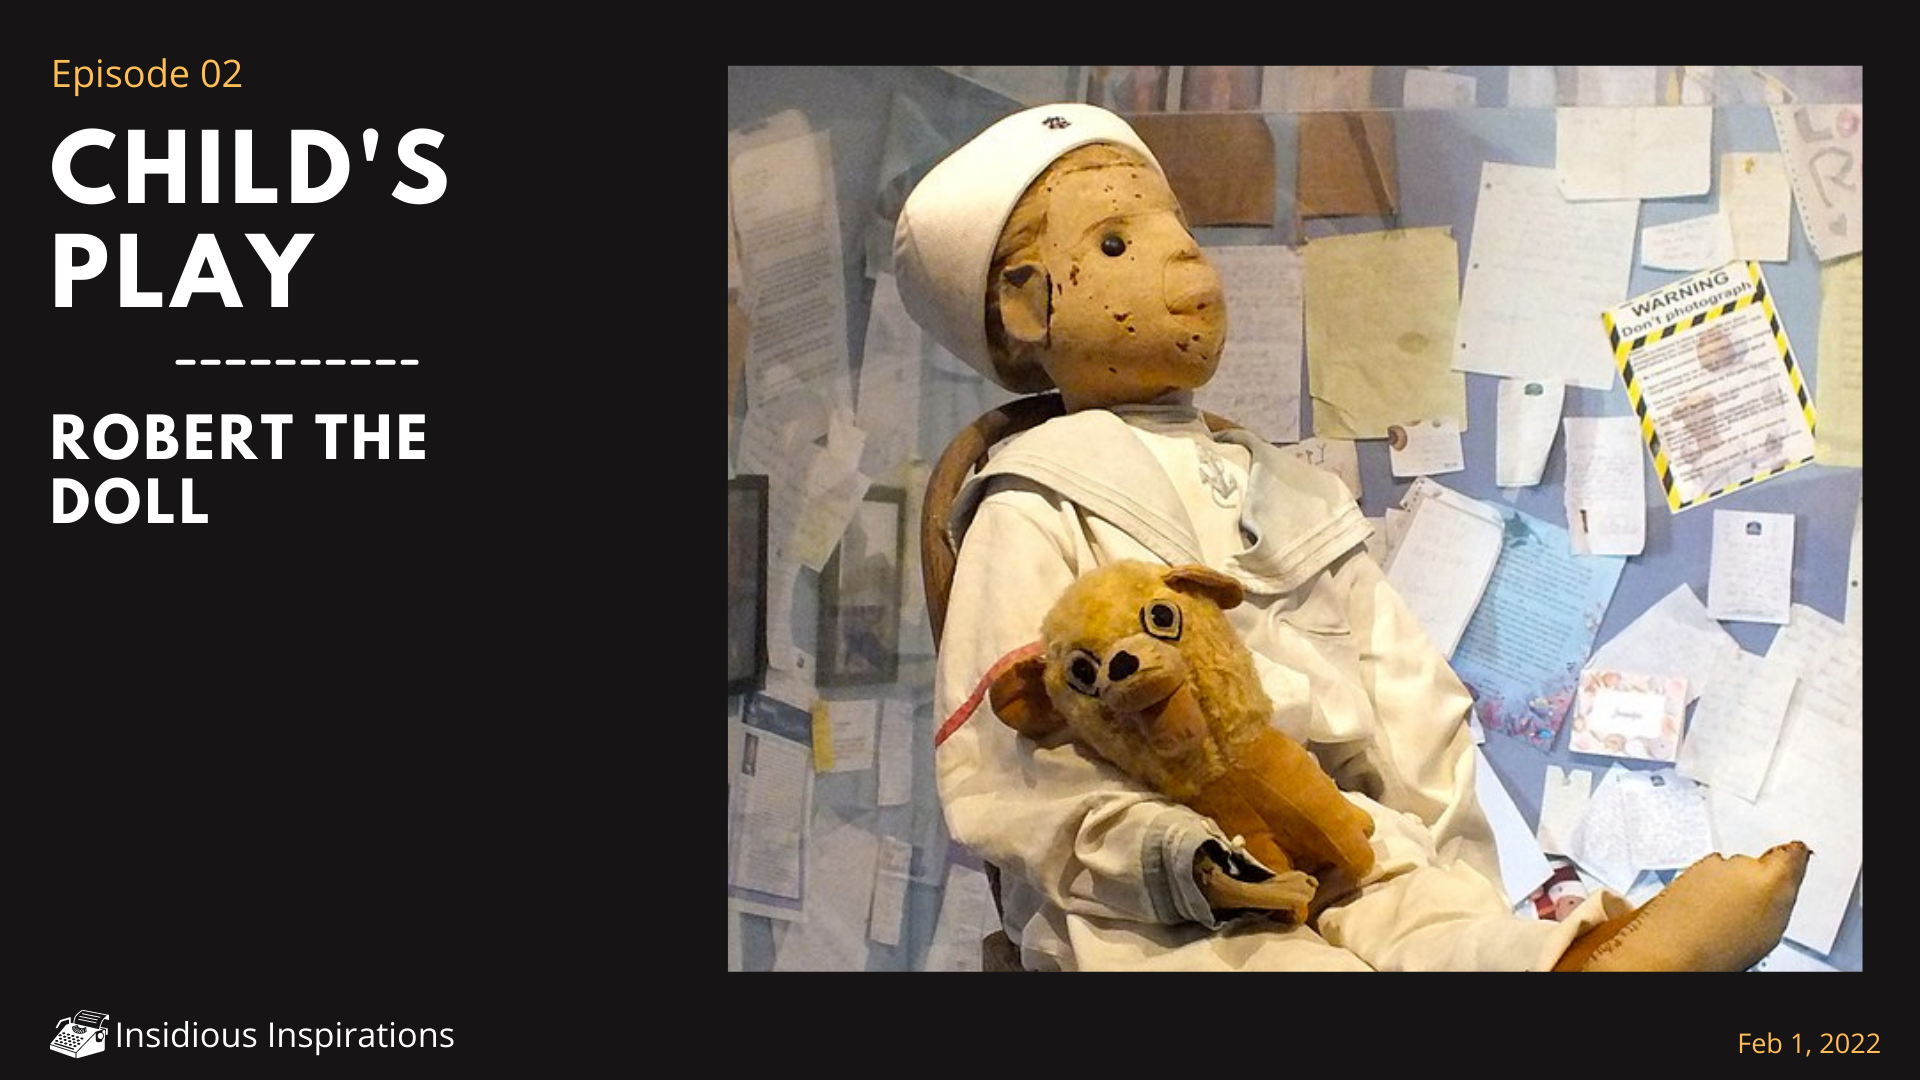 Banner for the podcast Insidious Inspirations. This week's episode is about Robert The Doll, the trust inspiration for Chucky!